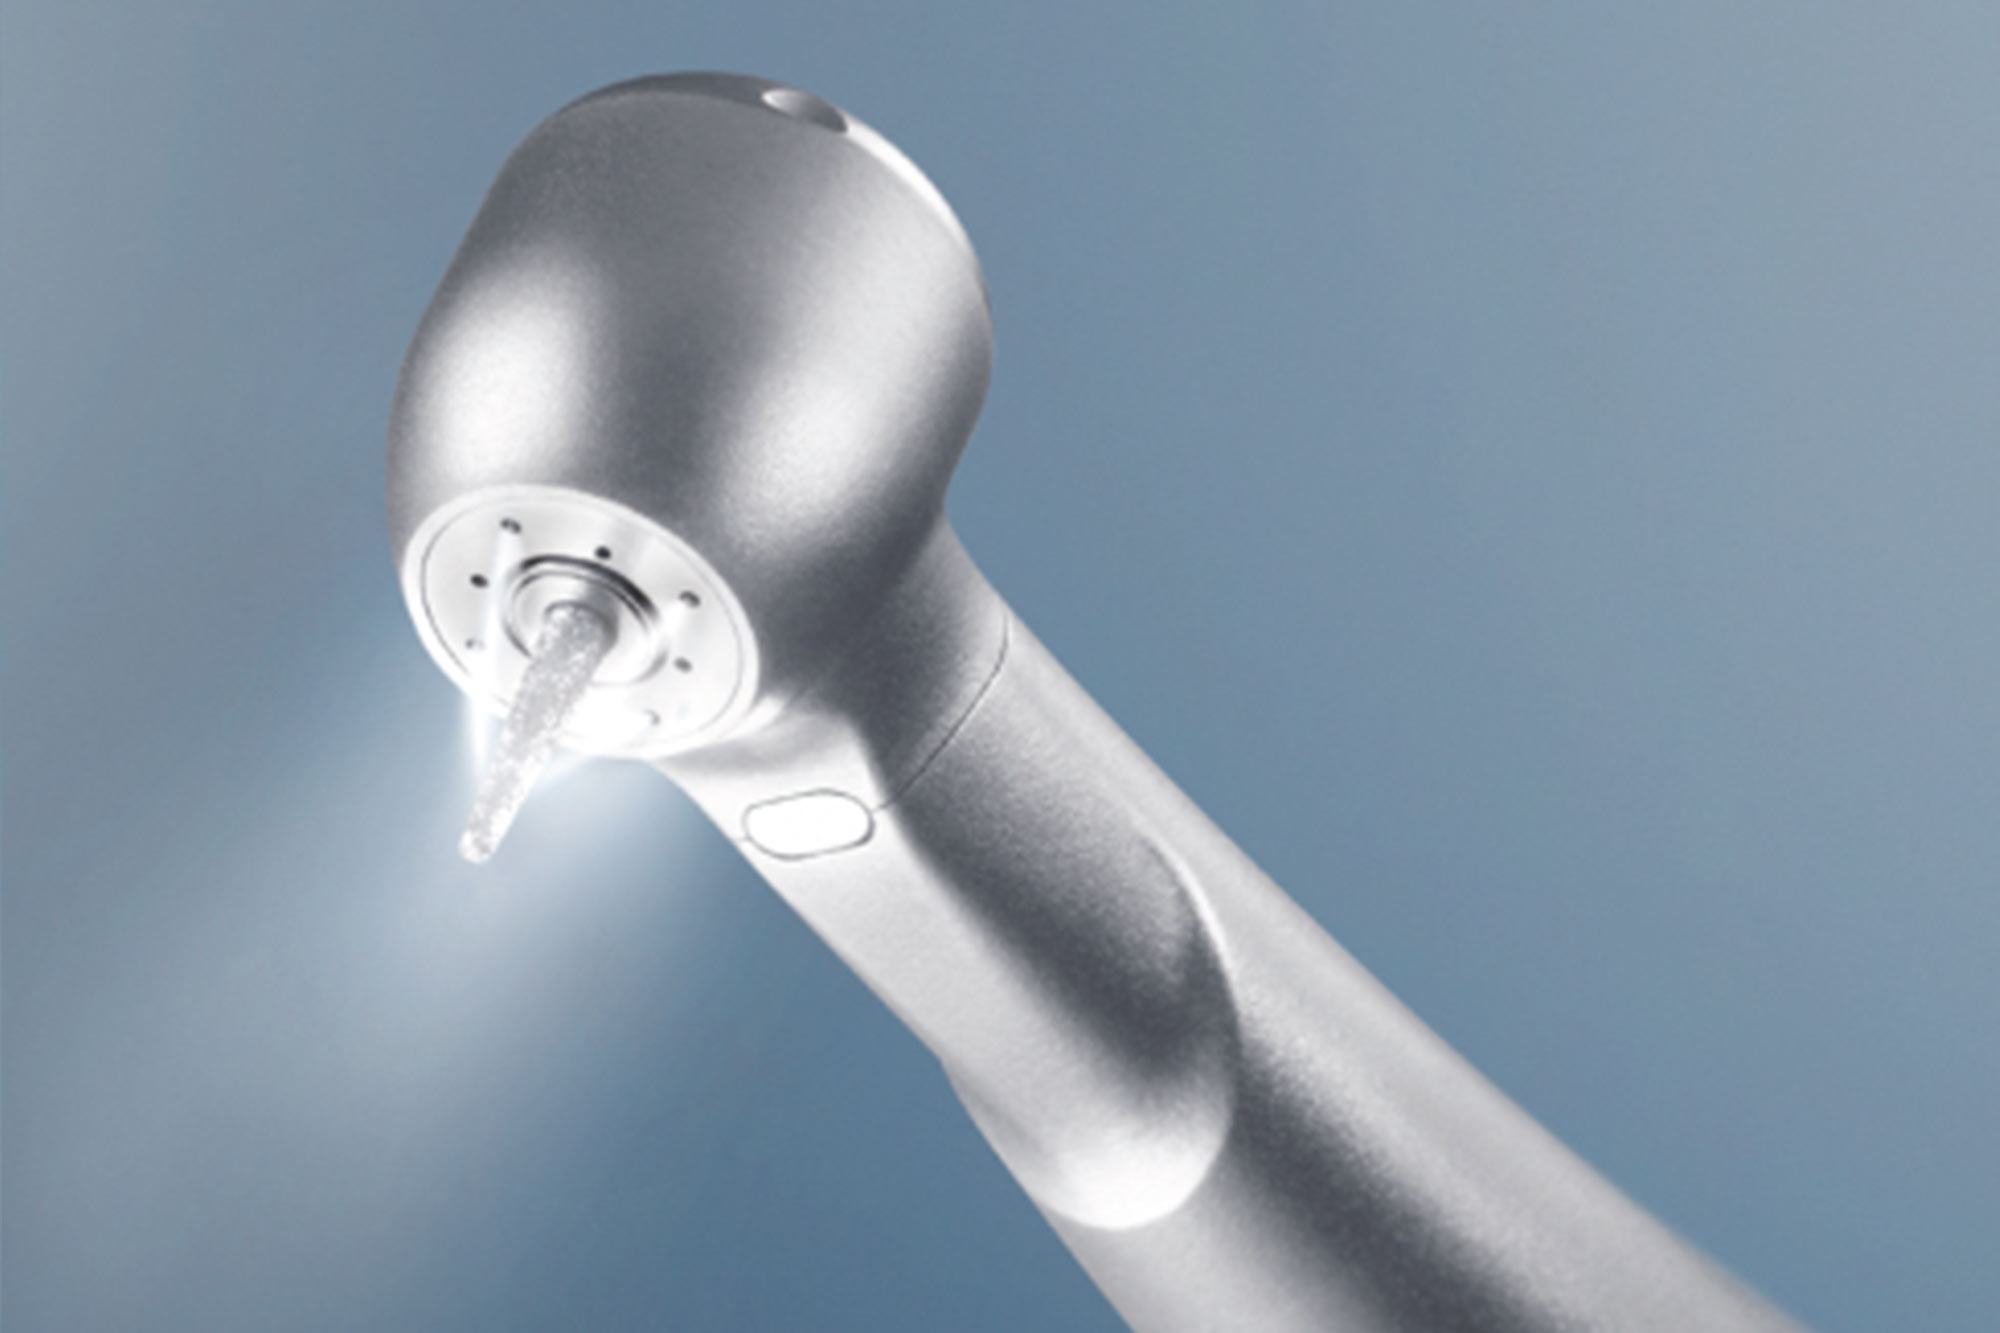 Last month FMC conducted the largest dental handpiece infection control survey ever undertaken. The results are in, and they make compelling reading, highlighting the disparities amongst dental practices in the UK